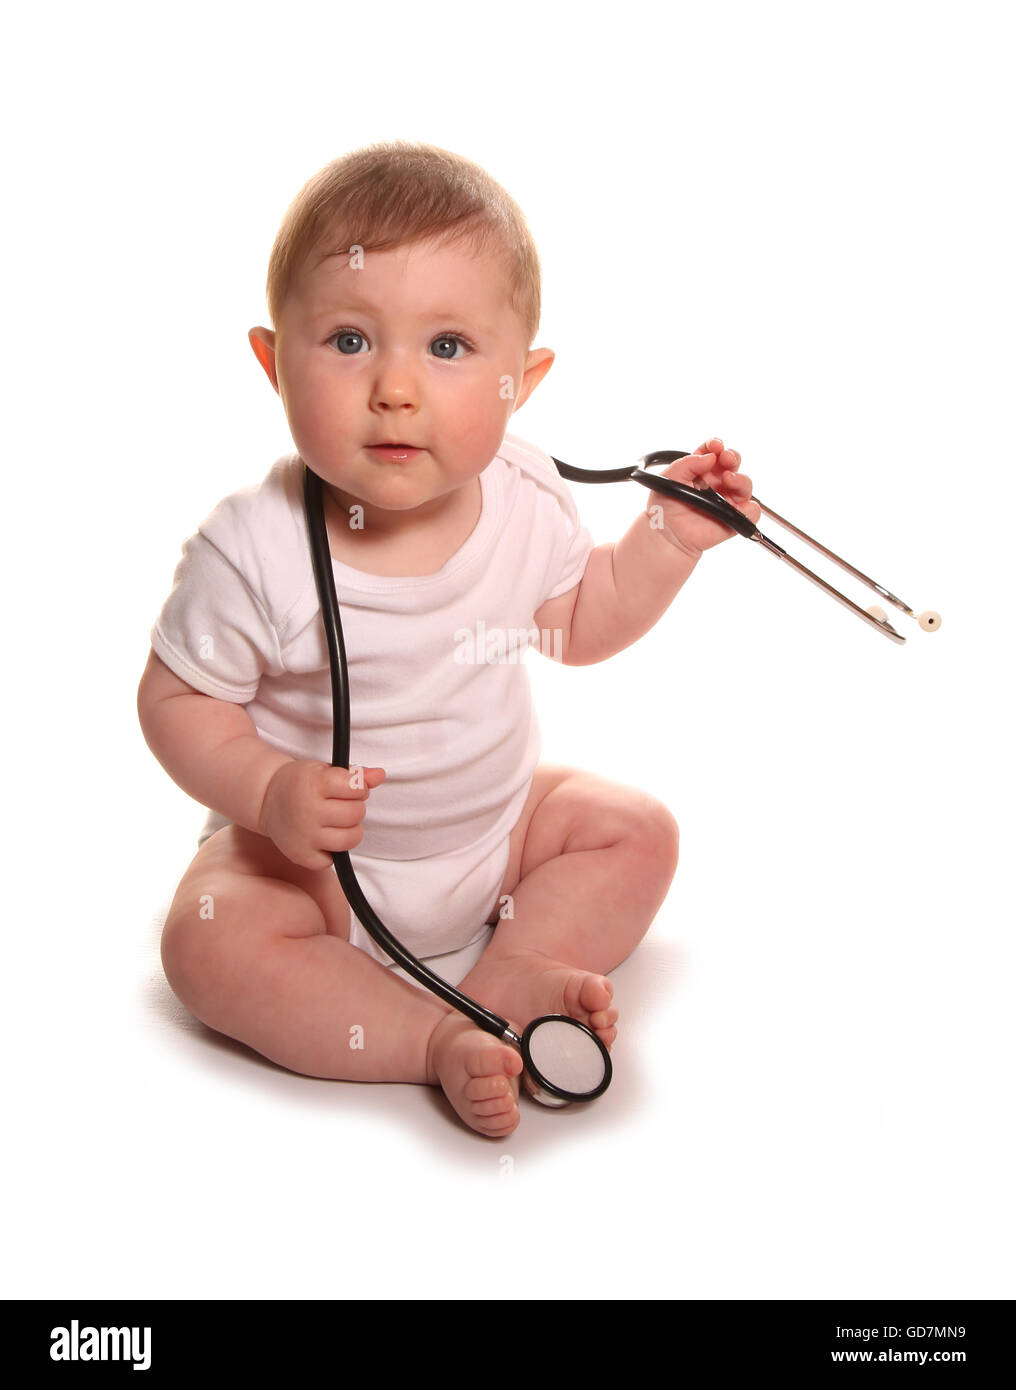 Baby girl with a stethoscope studio cutout Stock Photo